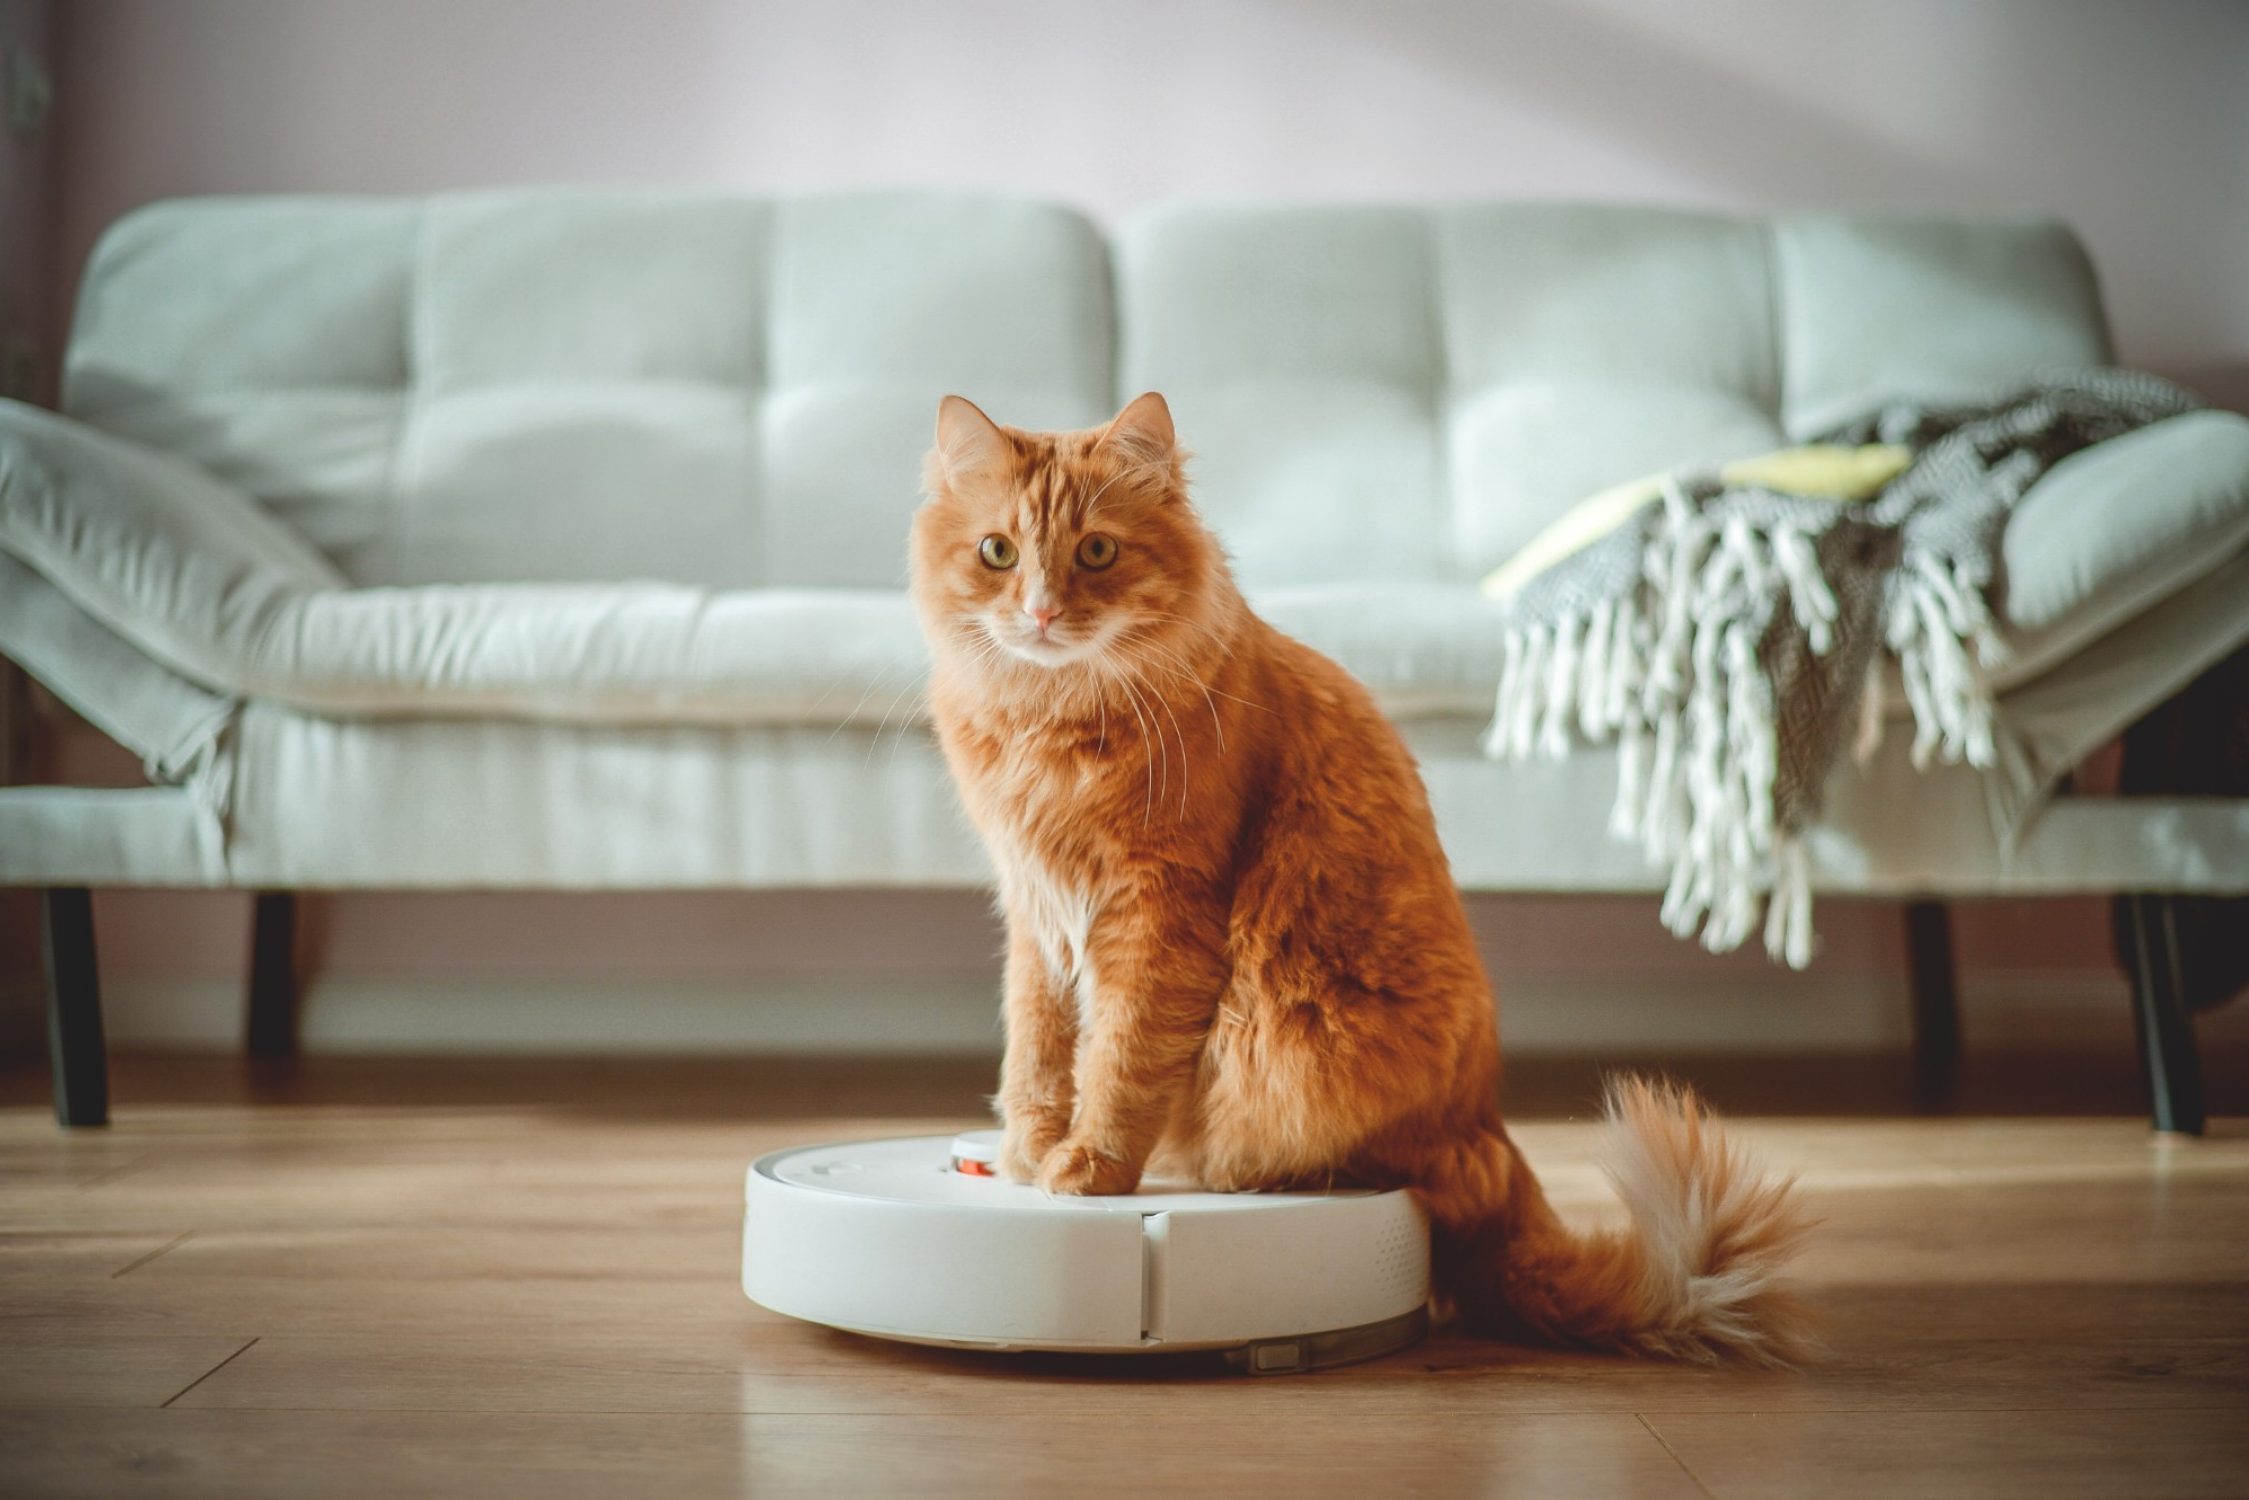 A cat sits on a robot hoover.